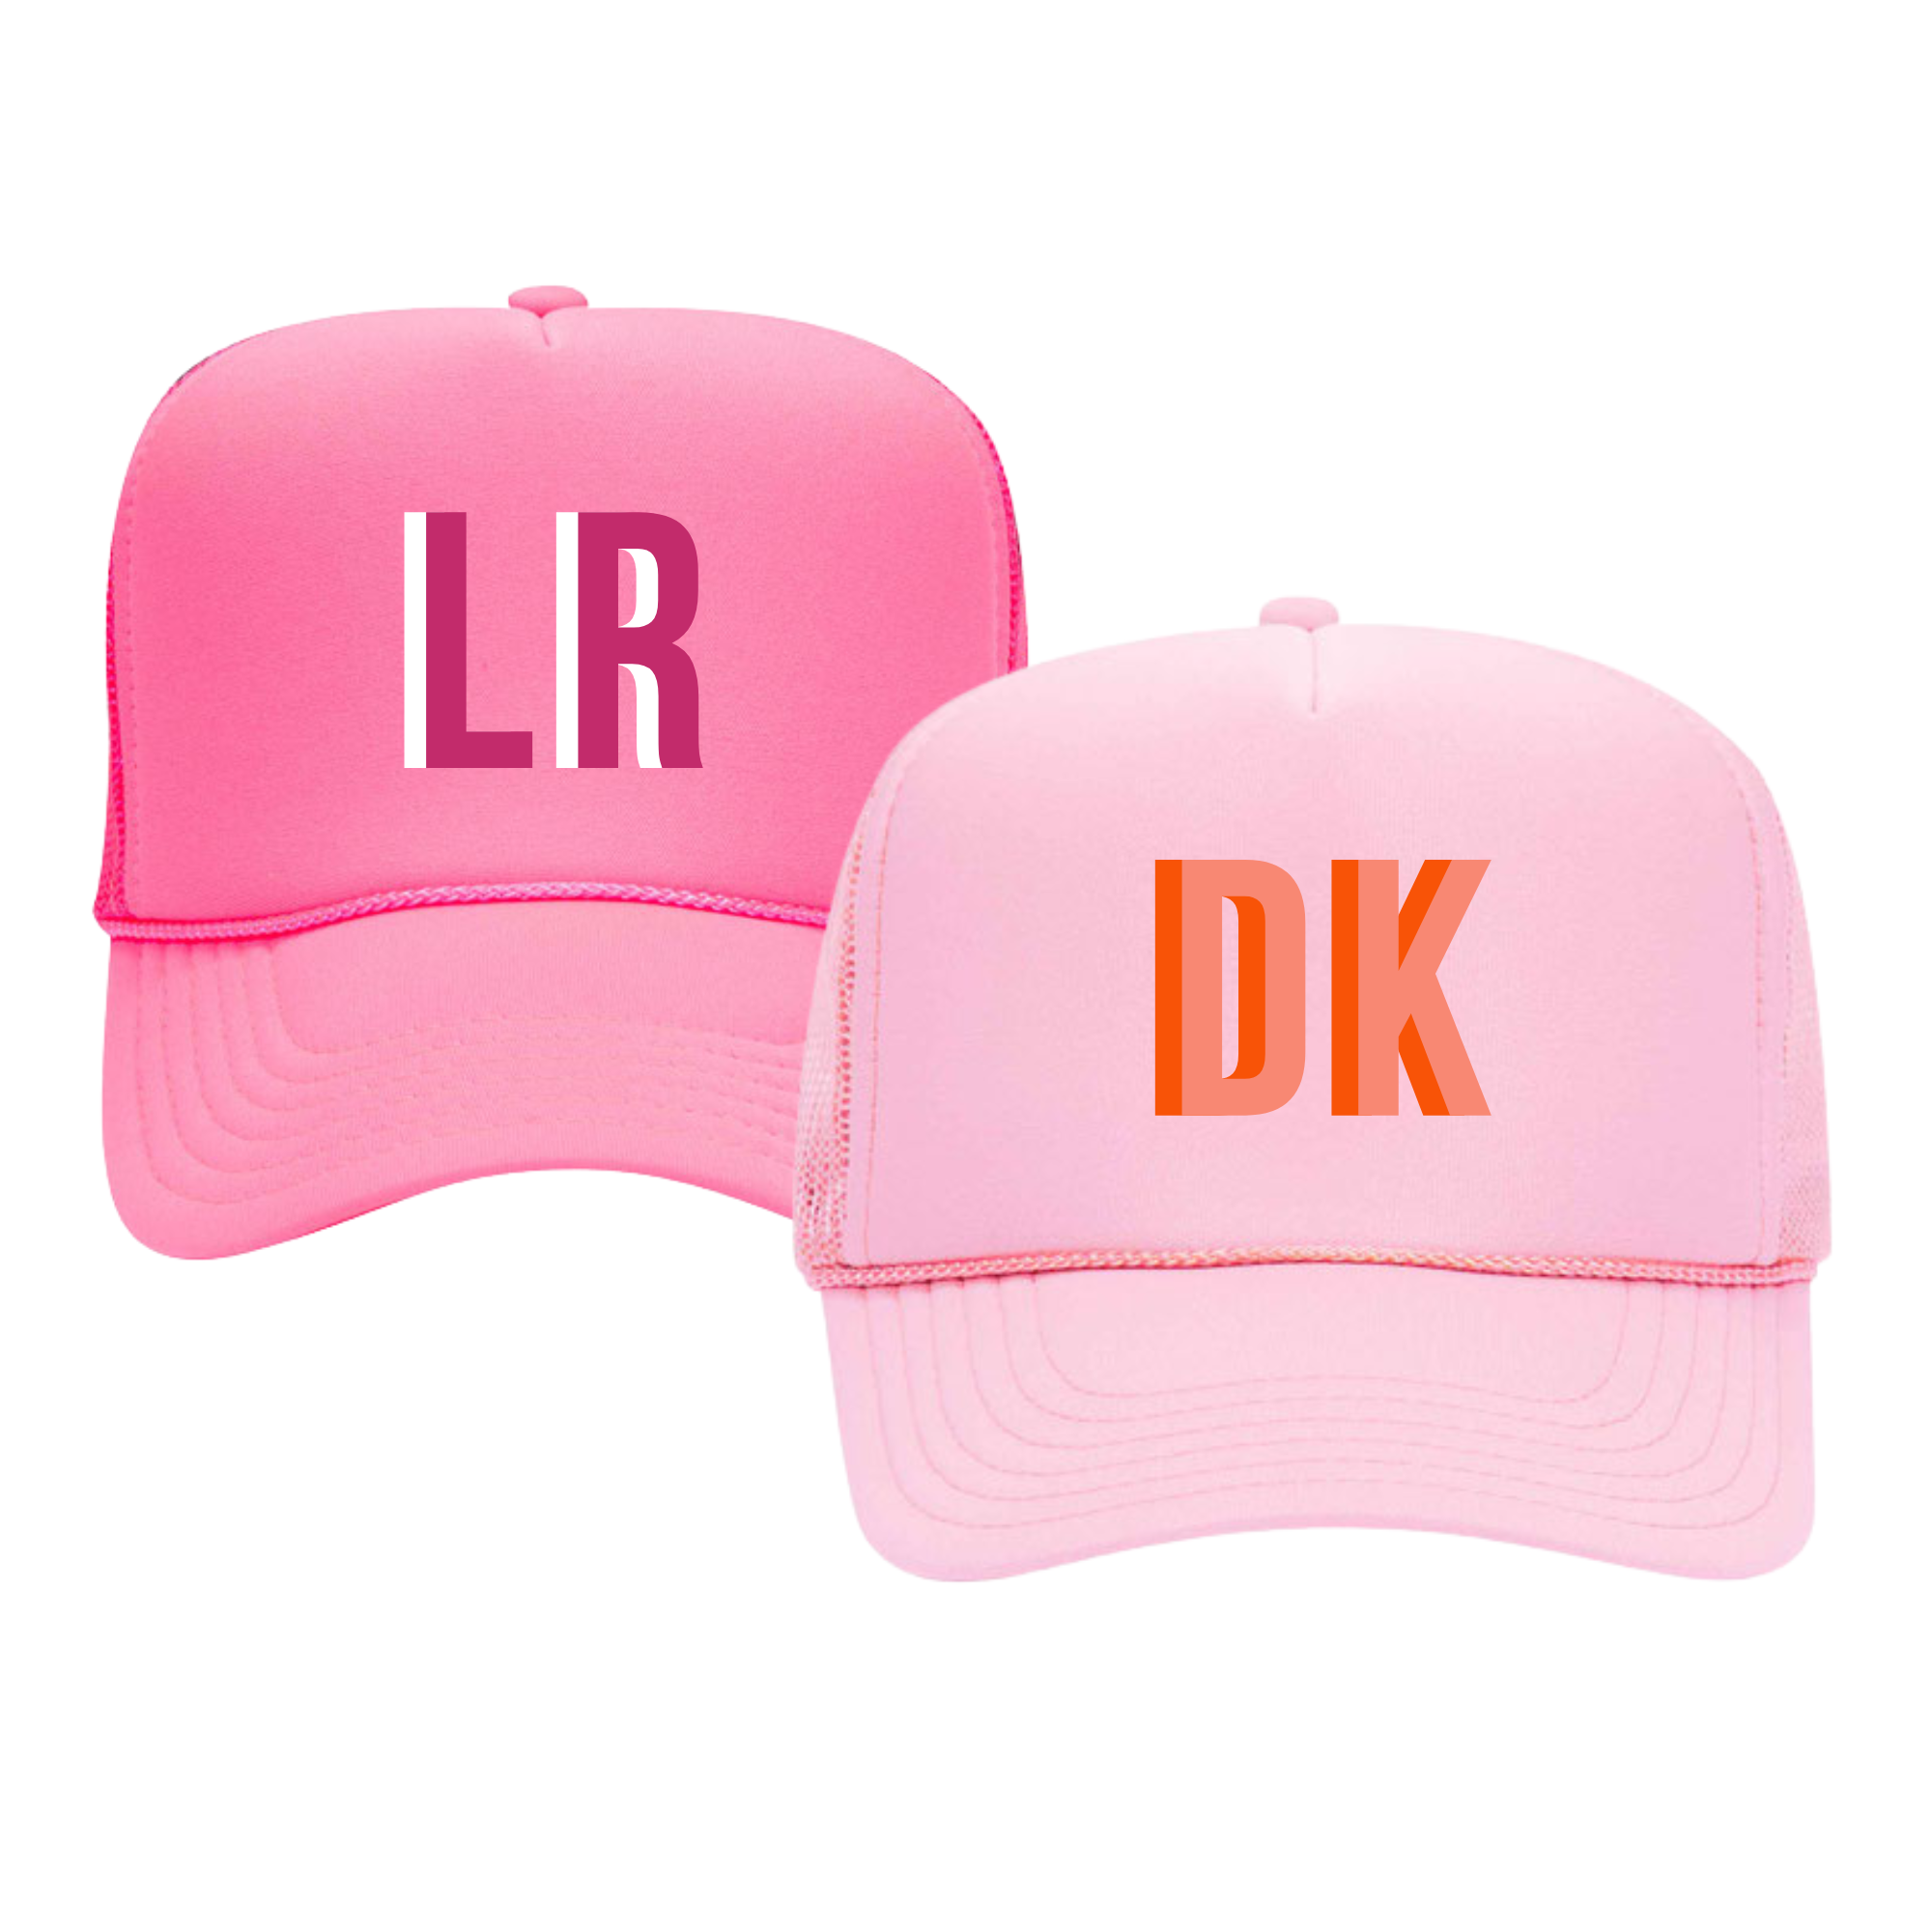 Customizable Trucker Hats - Sprinkled With Pink